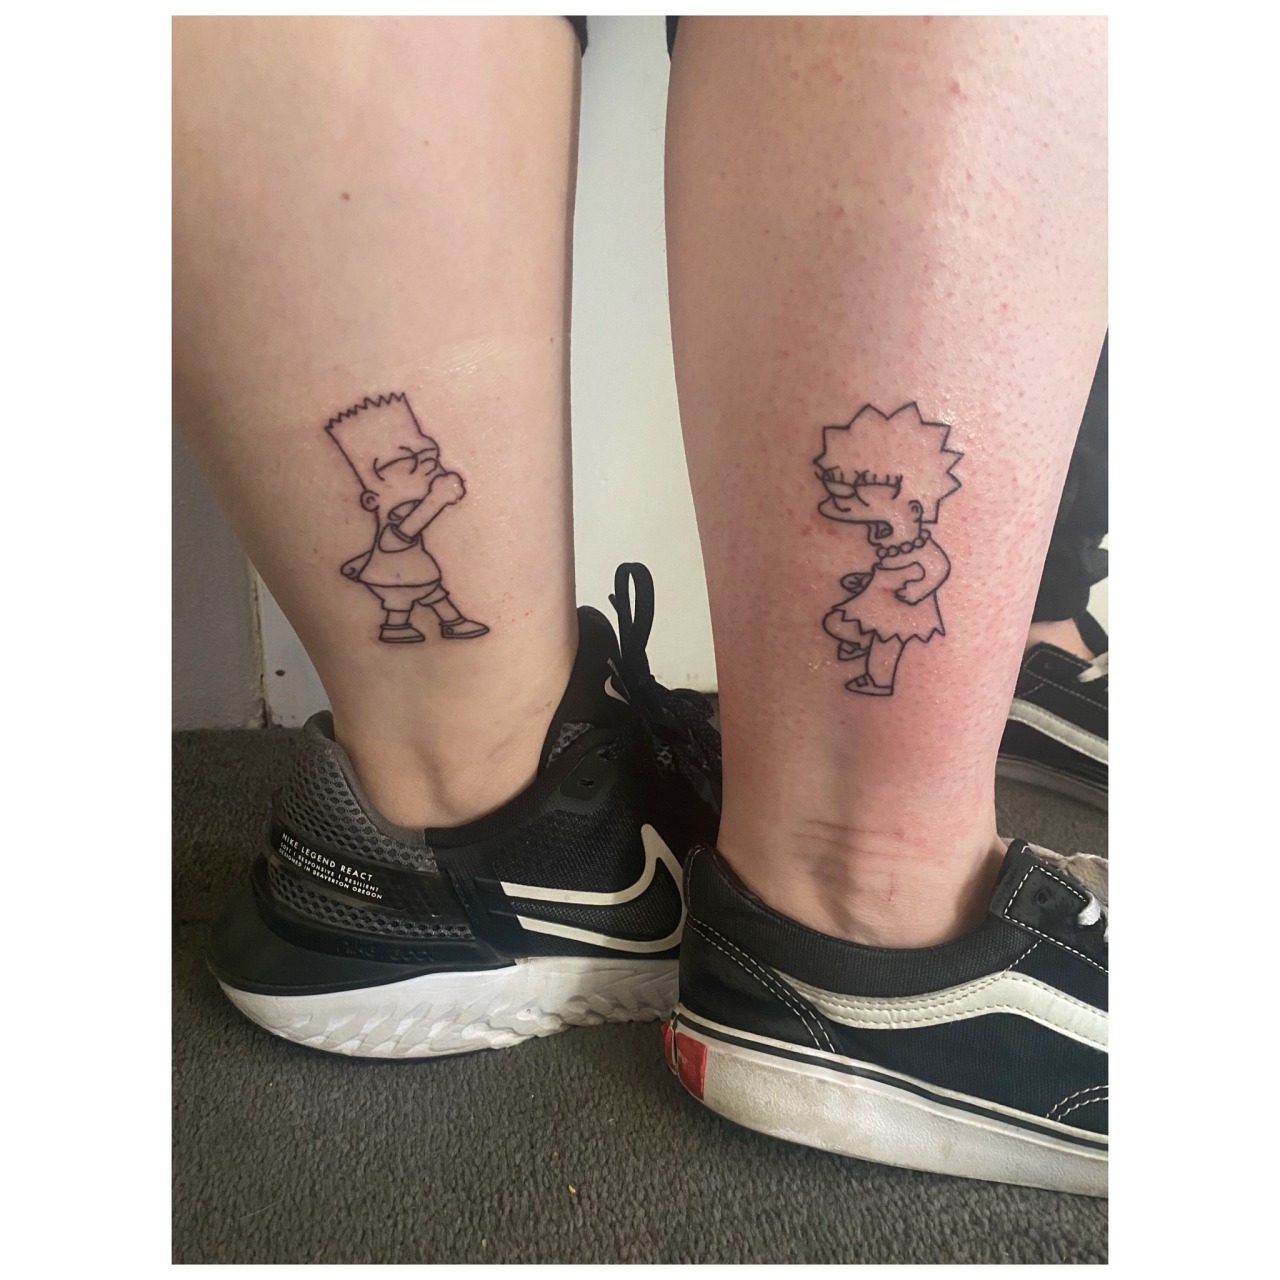 Hand poked Bart and Lisa tattoo on the thigh